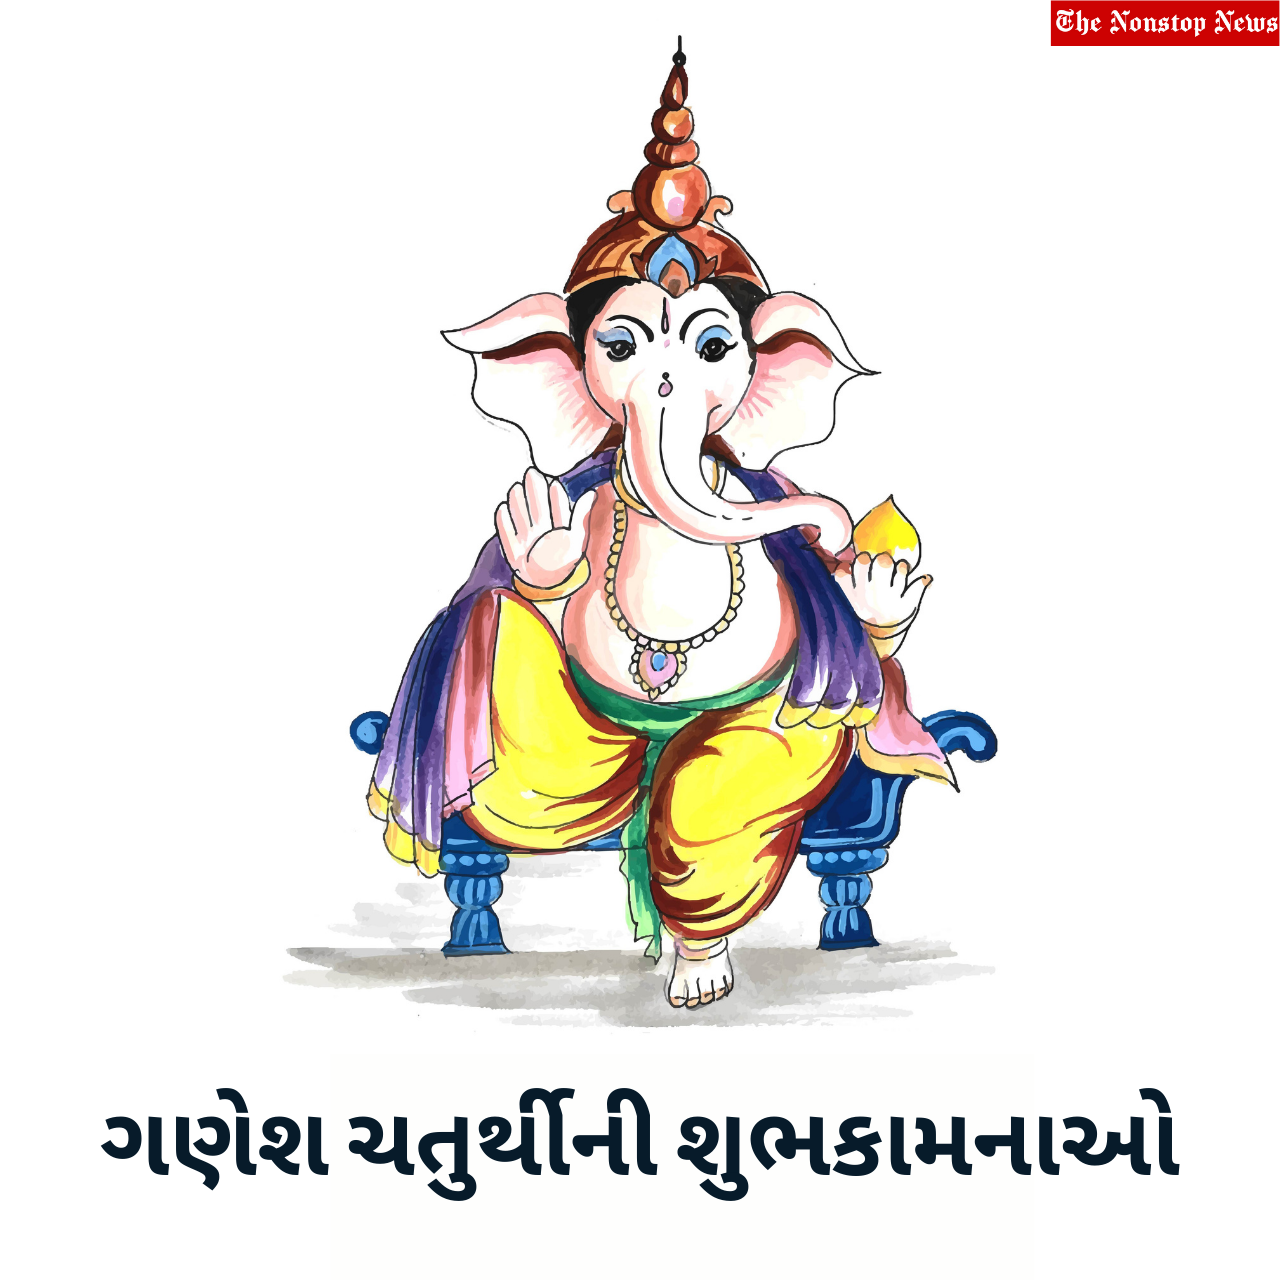 Ganesh Chaturthi 2021 Gujarati Wishes, Quotes, HD Images, Messages, Greetings, and Status to Share to anyone